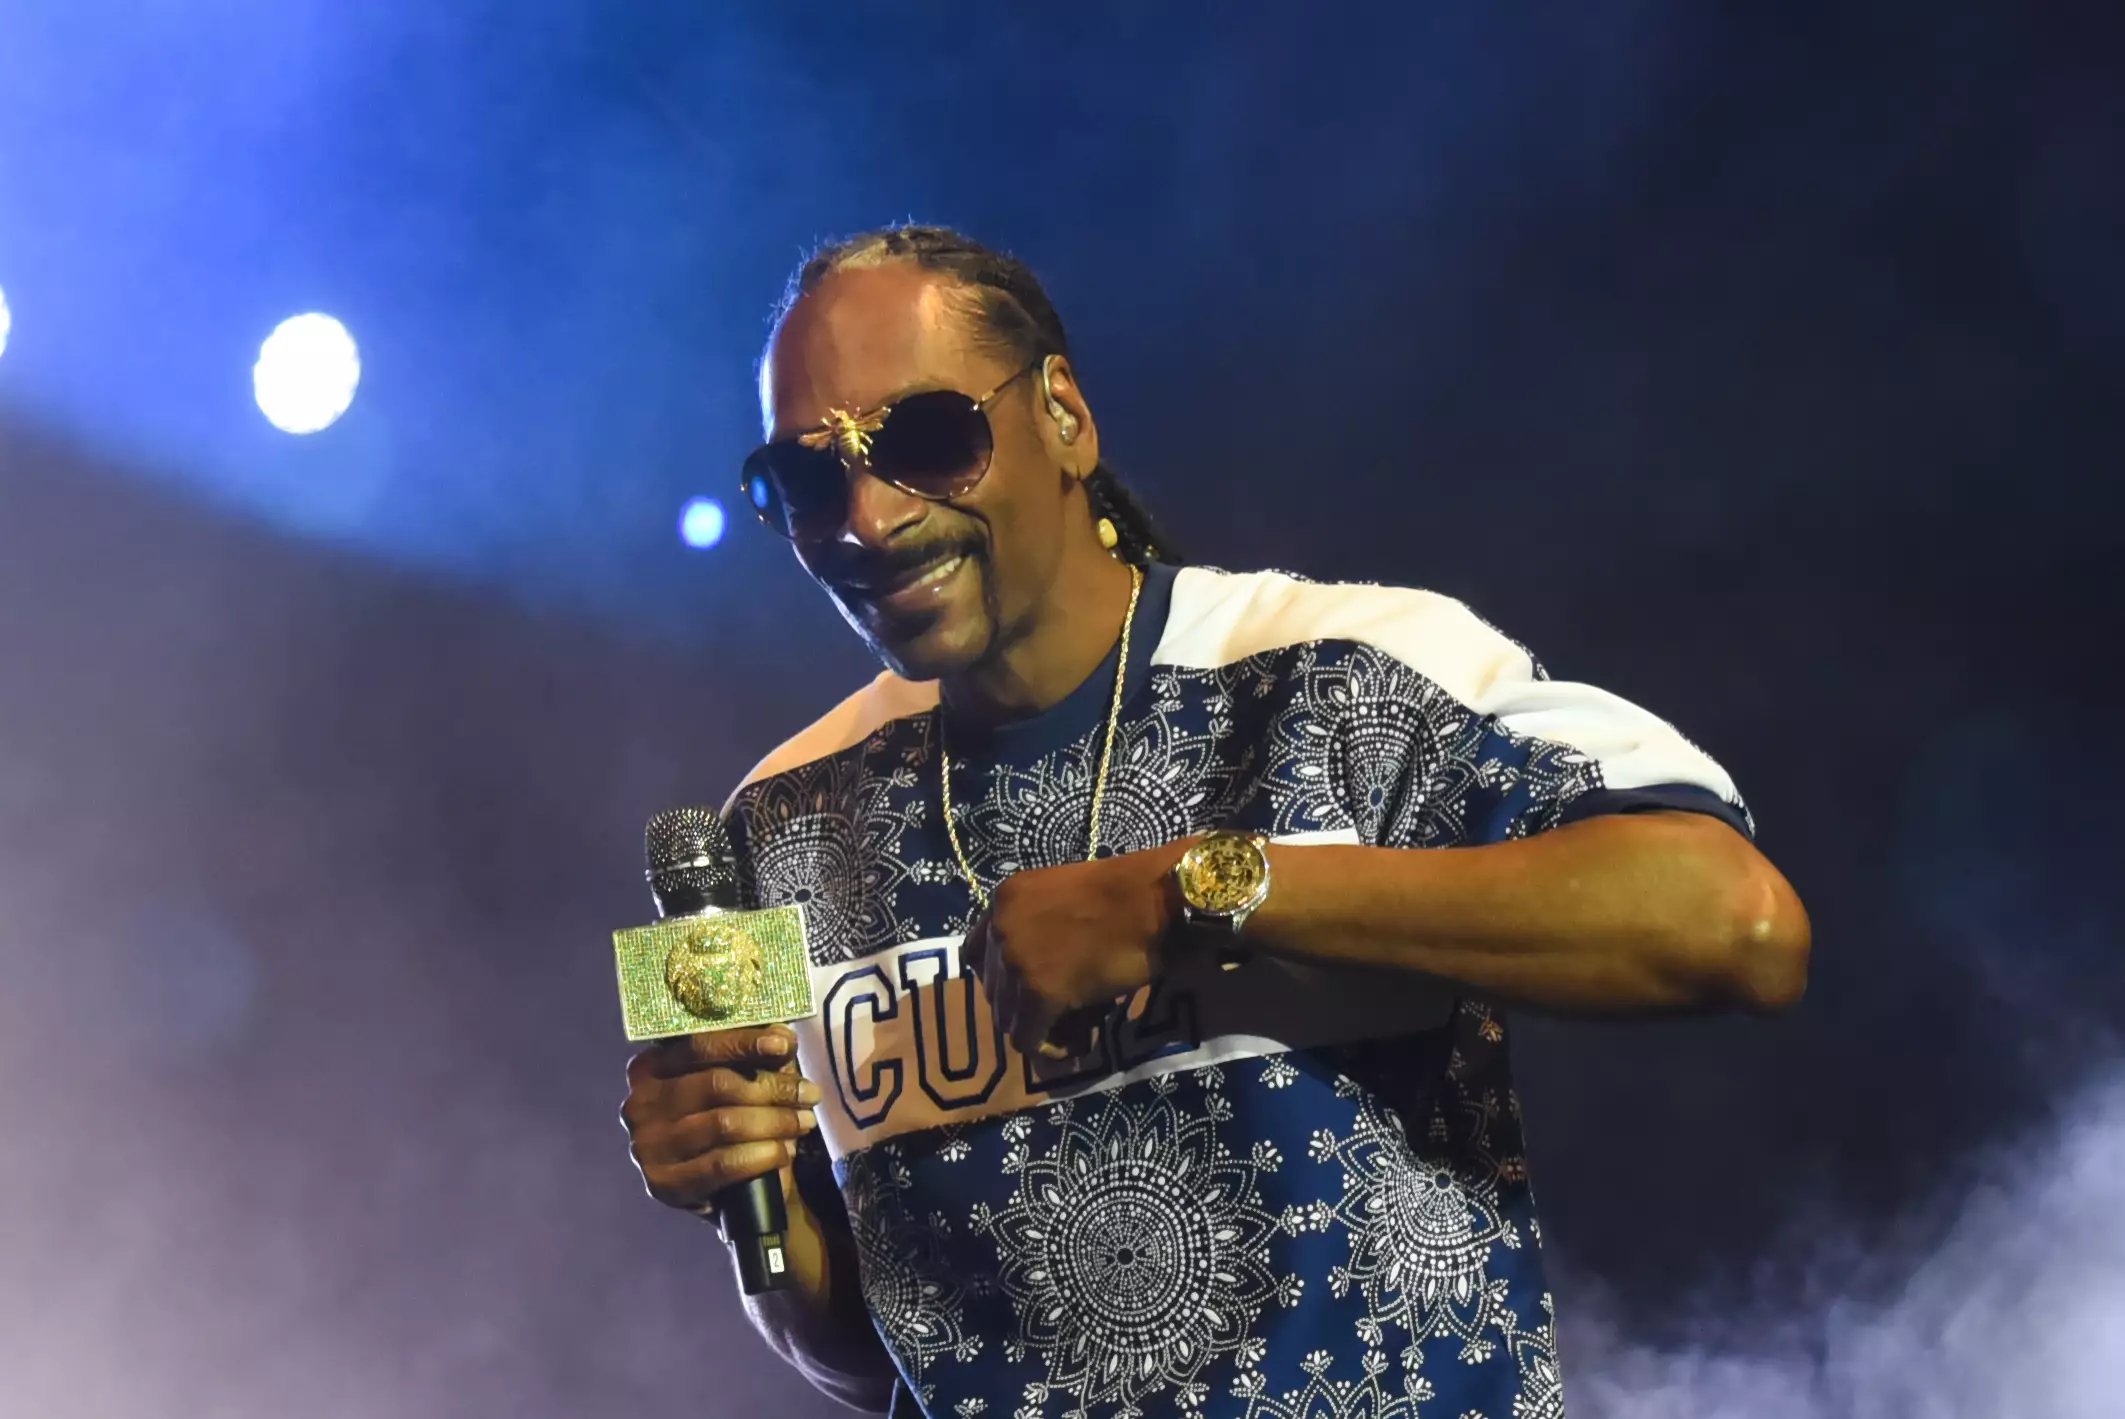 Snoop Dogg doing what he does best.